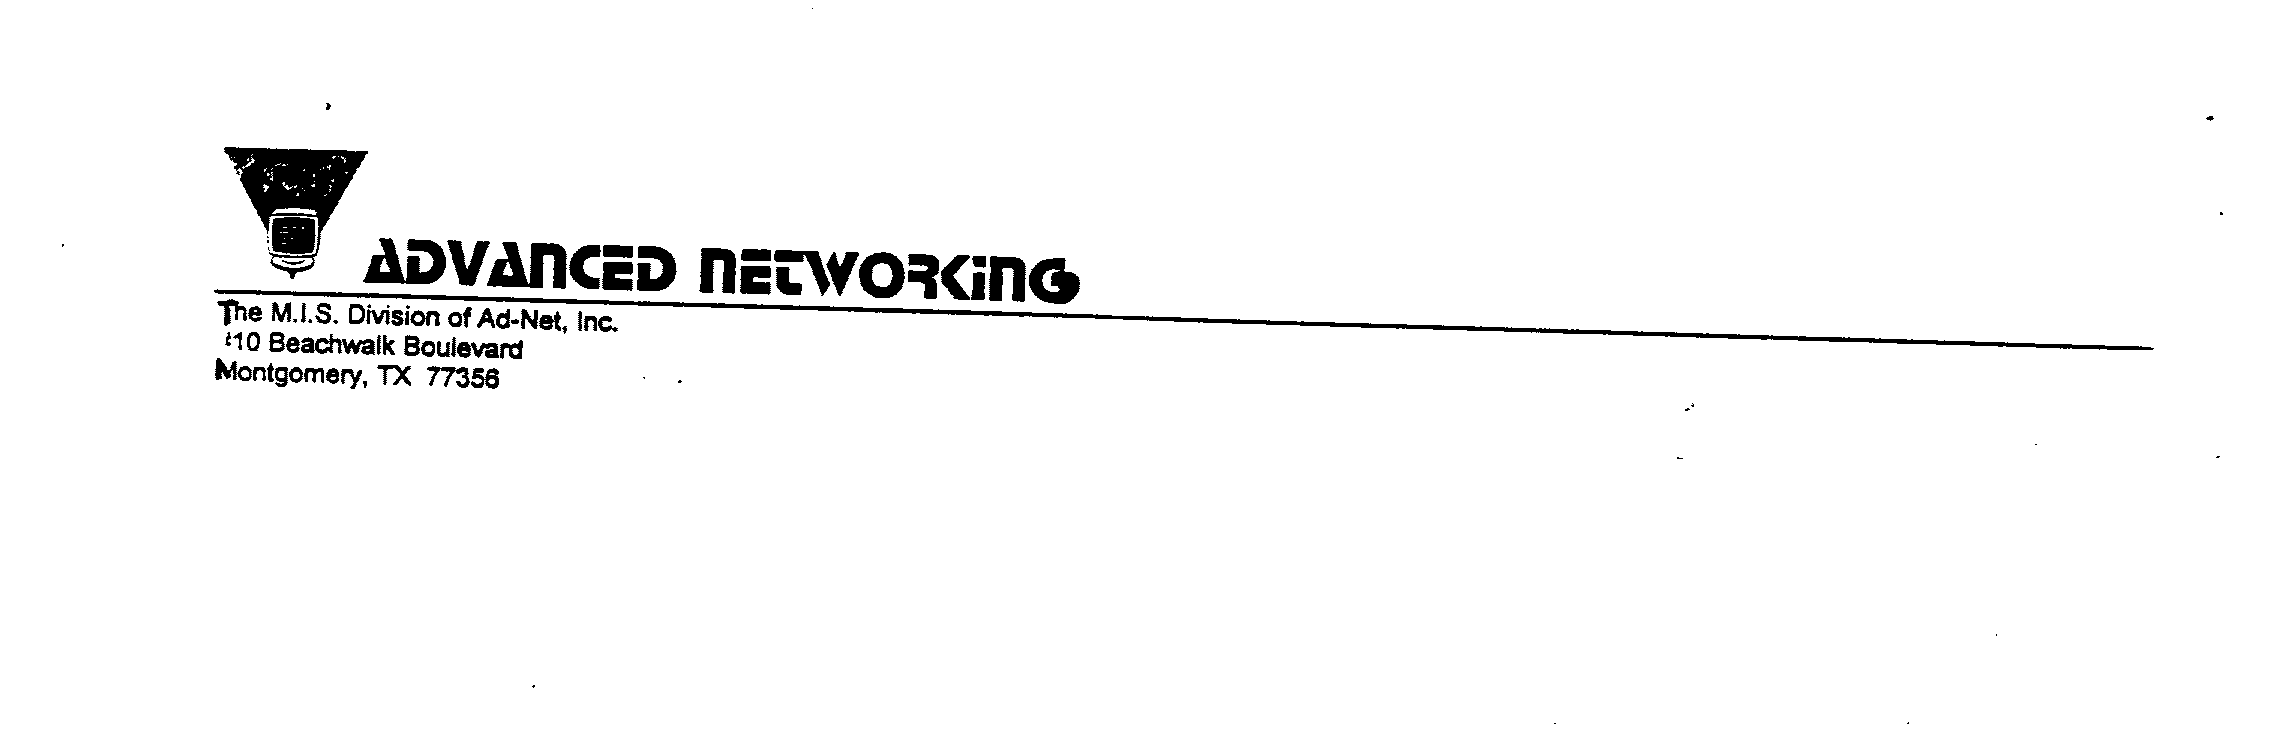  ADVANCED NETWORKING